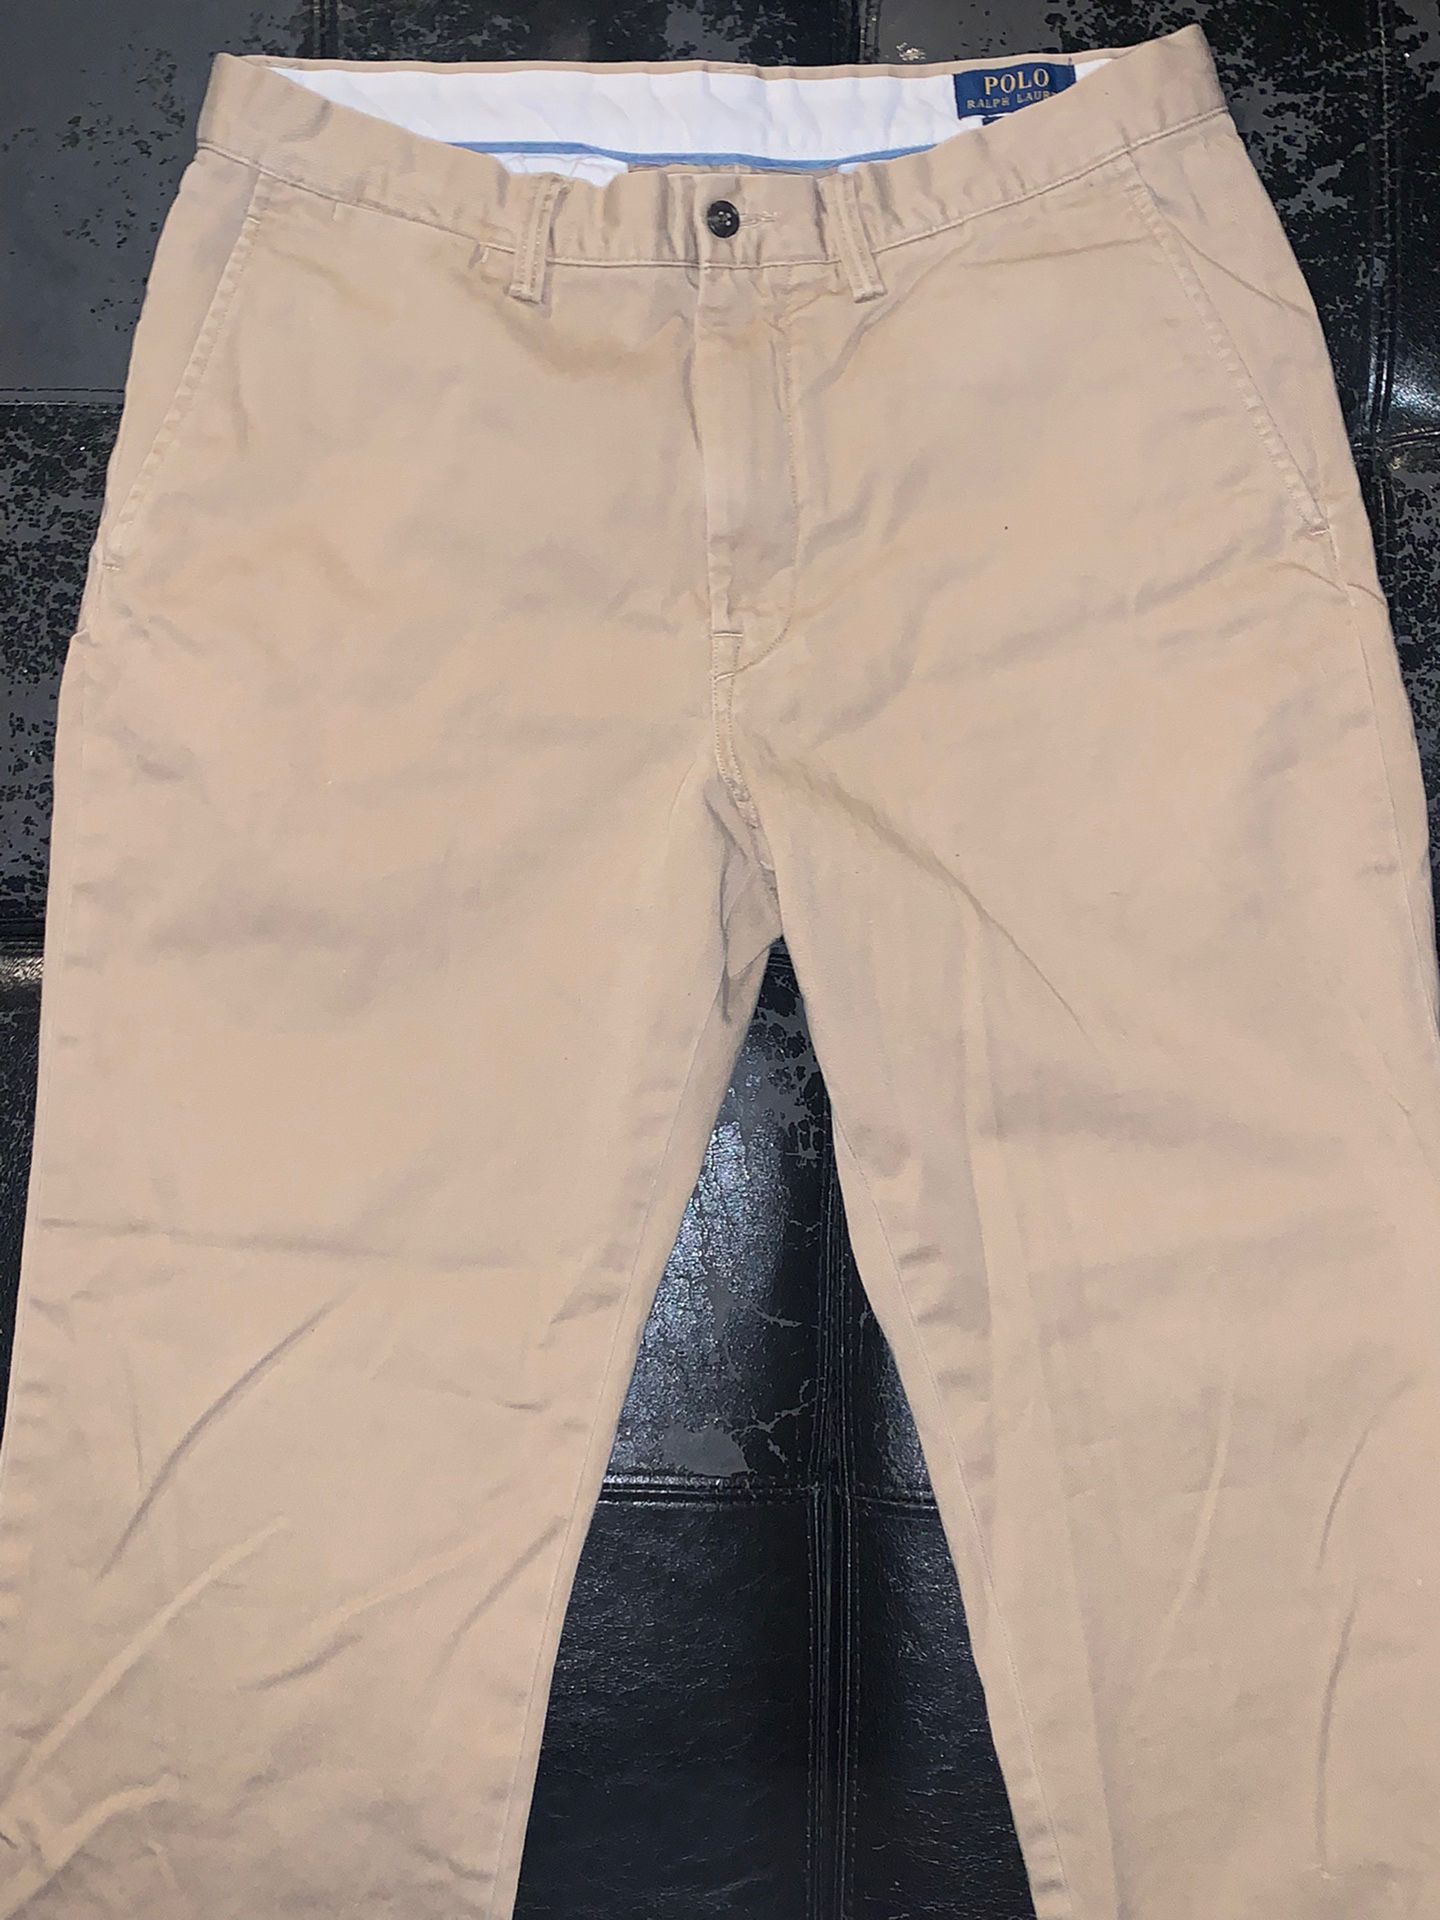 polo ralph lauren chino khaki pants new without tags